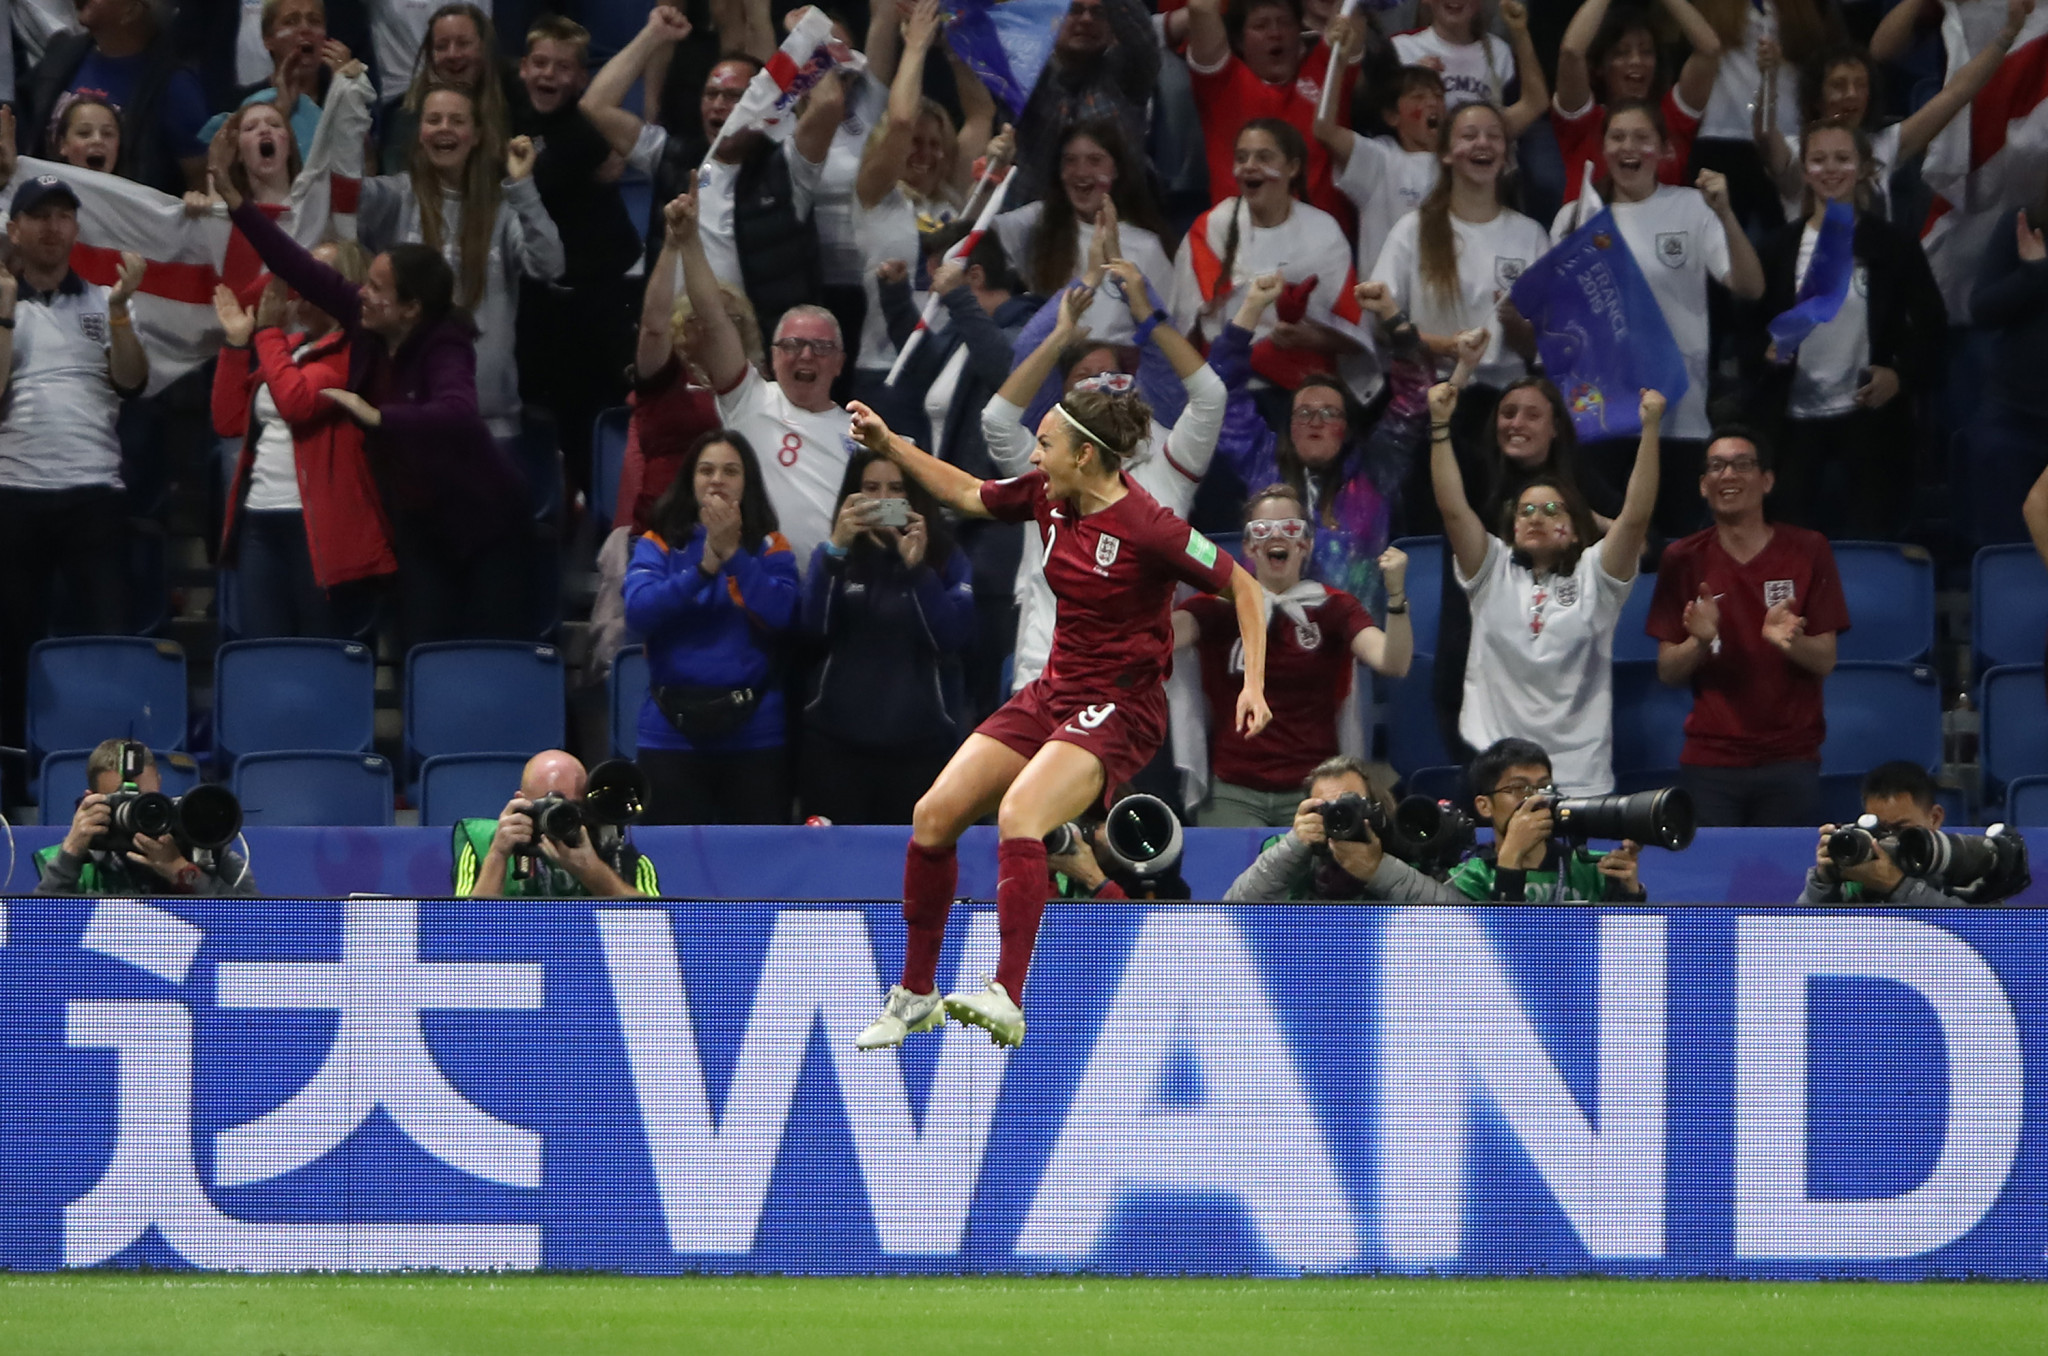 Jodie Taylor of England celebrates after breaking the deadlock in England's Group D match against Argentina ©Getty Images